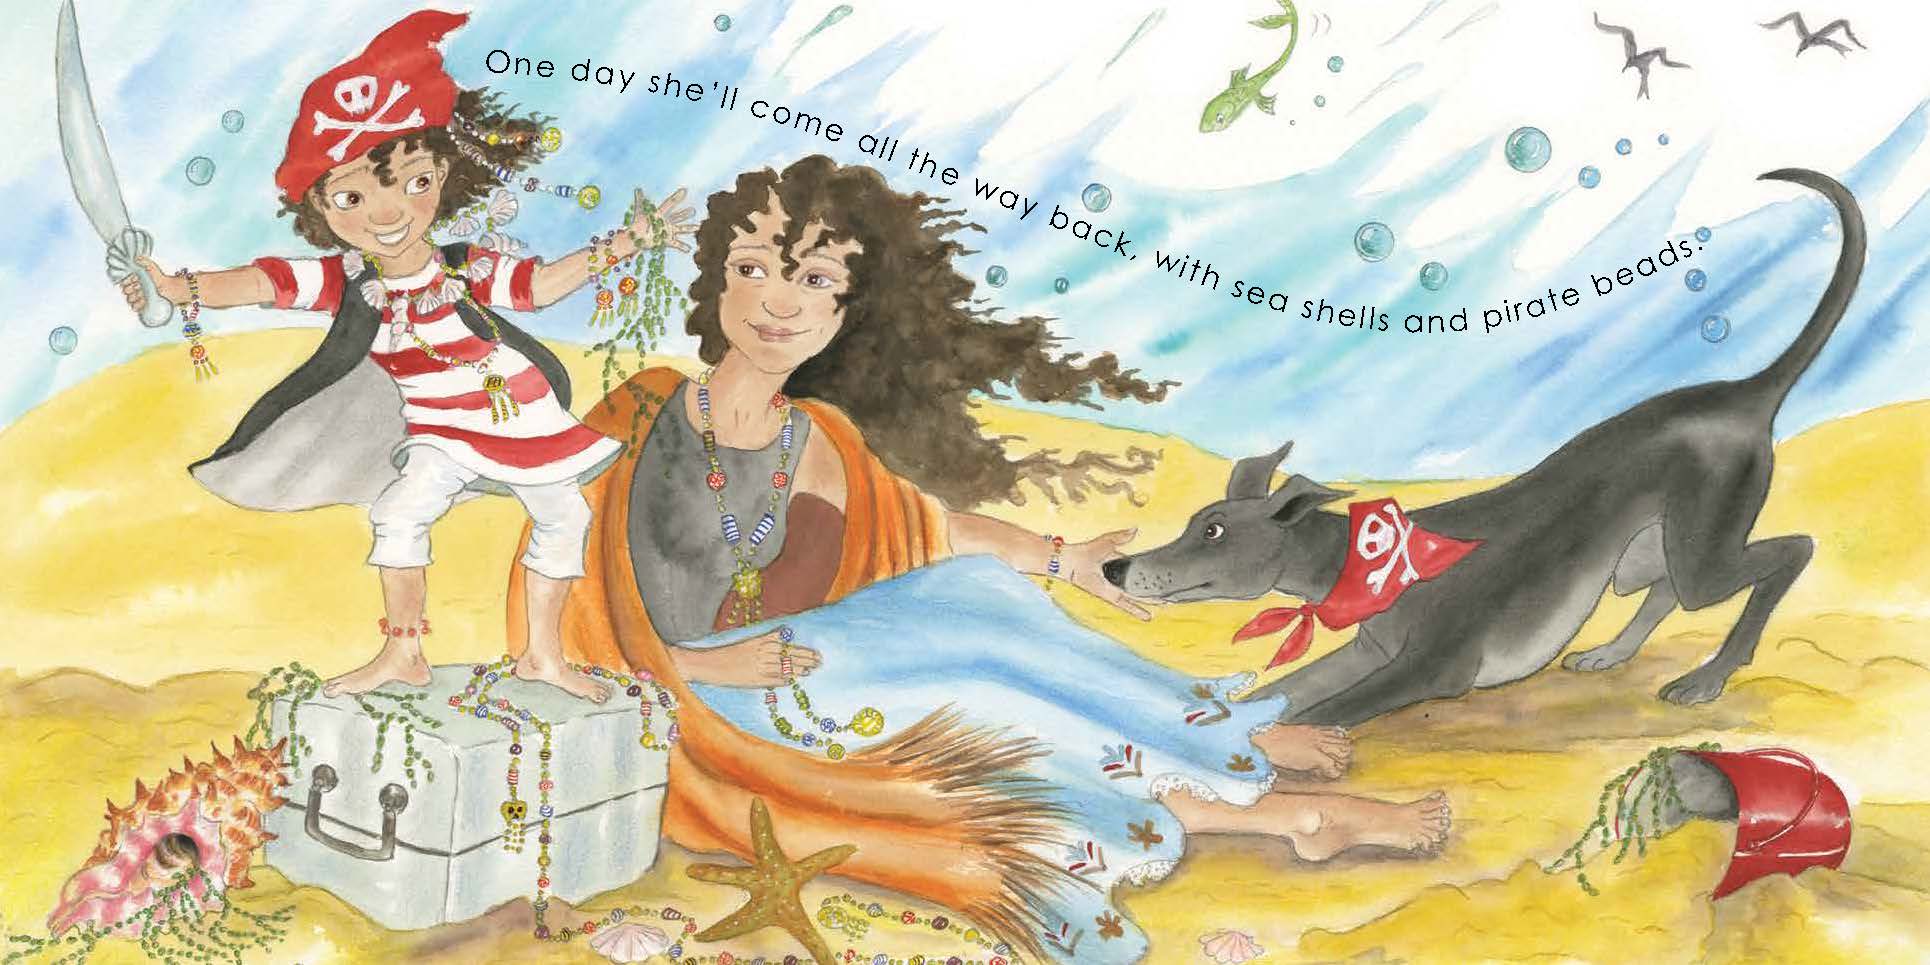 A children's book page with a child dressed as a pirate and a mother looking on.